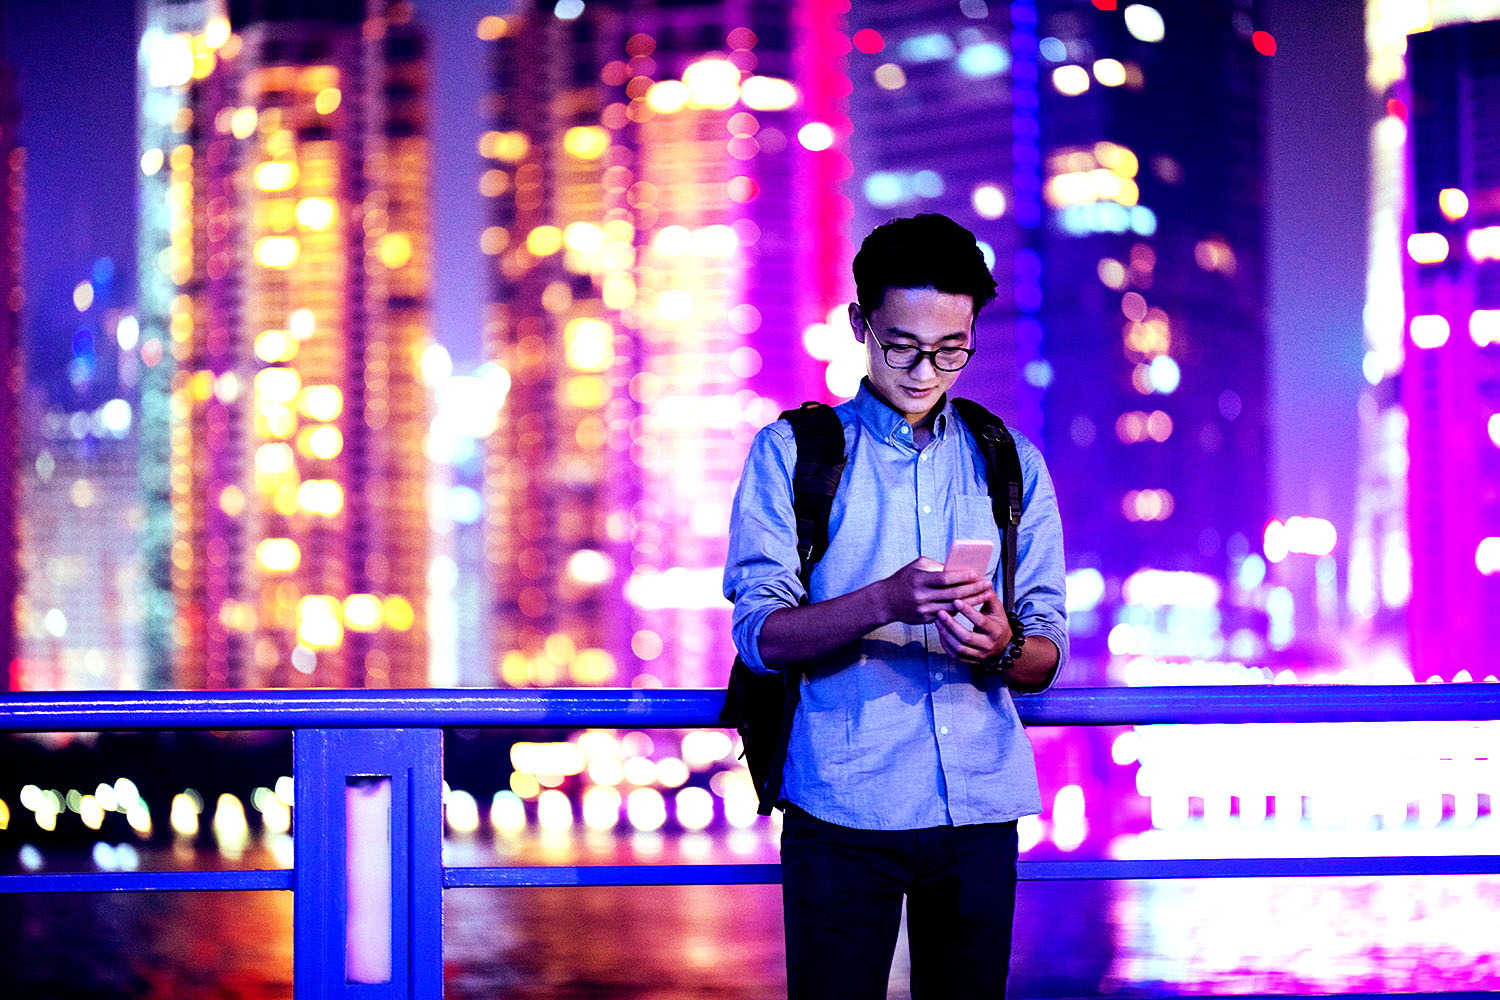 Man using smartphone near a river and skyscrapers in background.